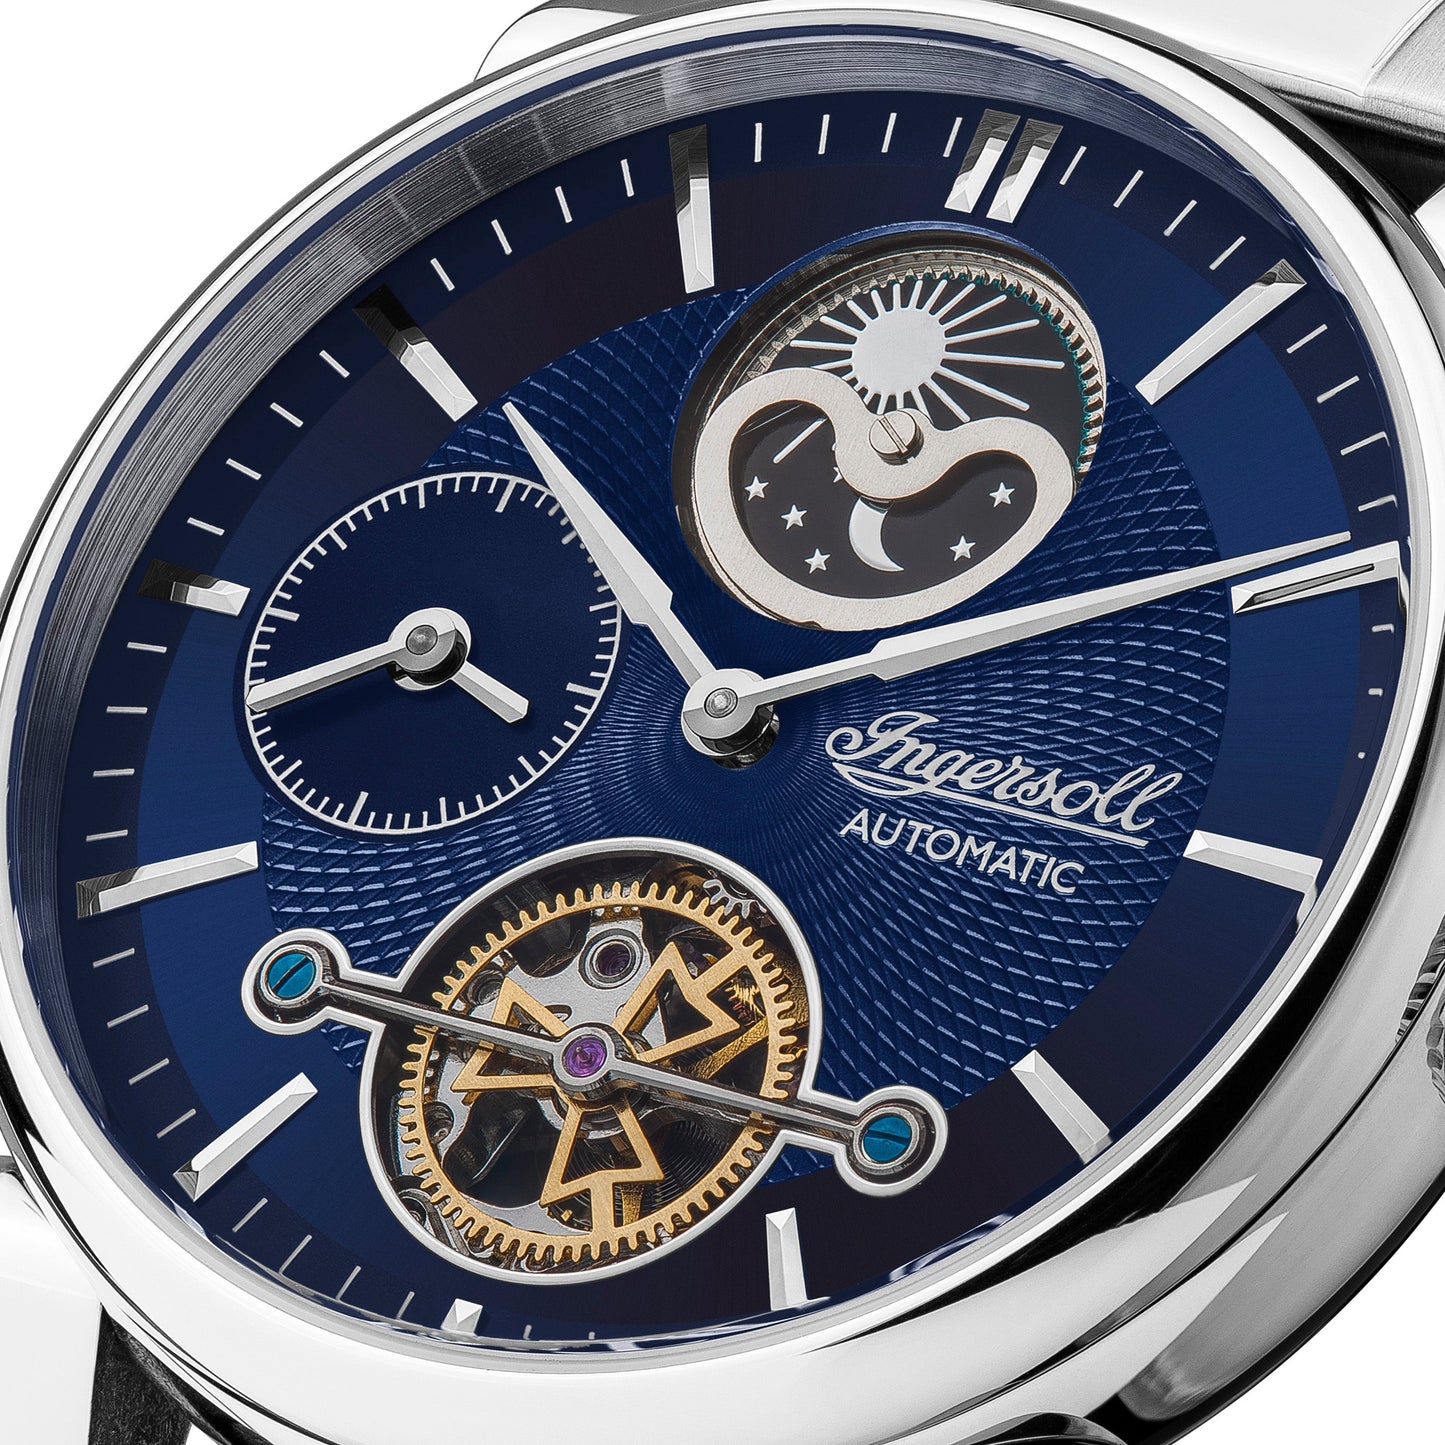 Ingersoll The Swing Silver Skeleton Automatic Watch